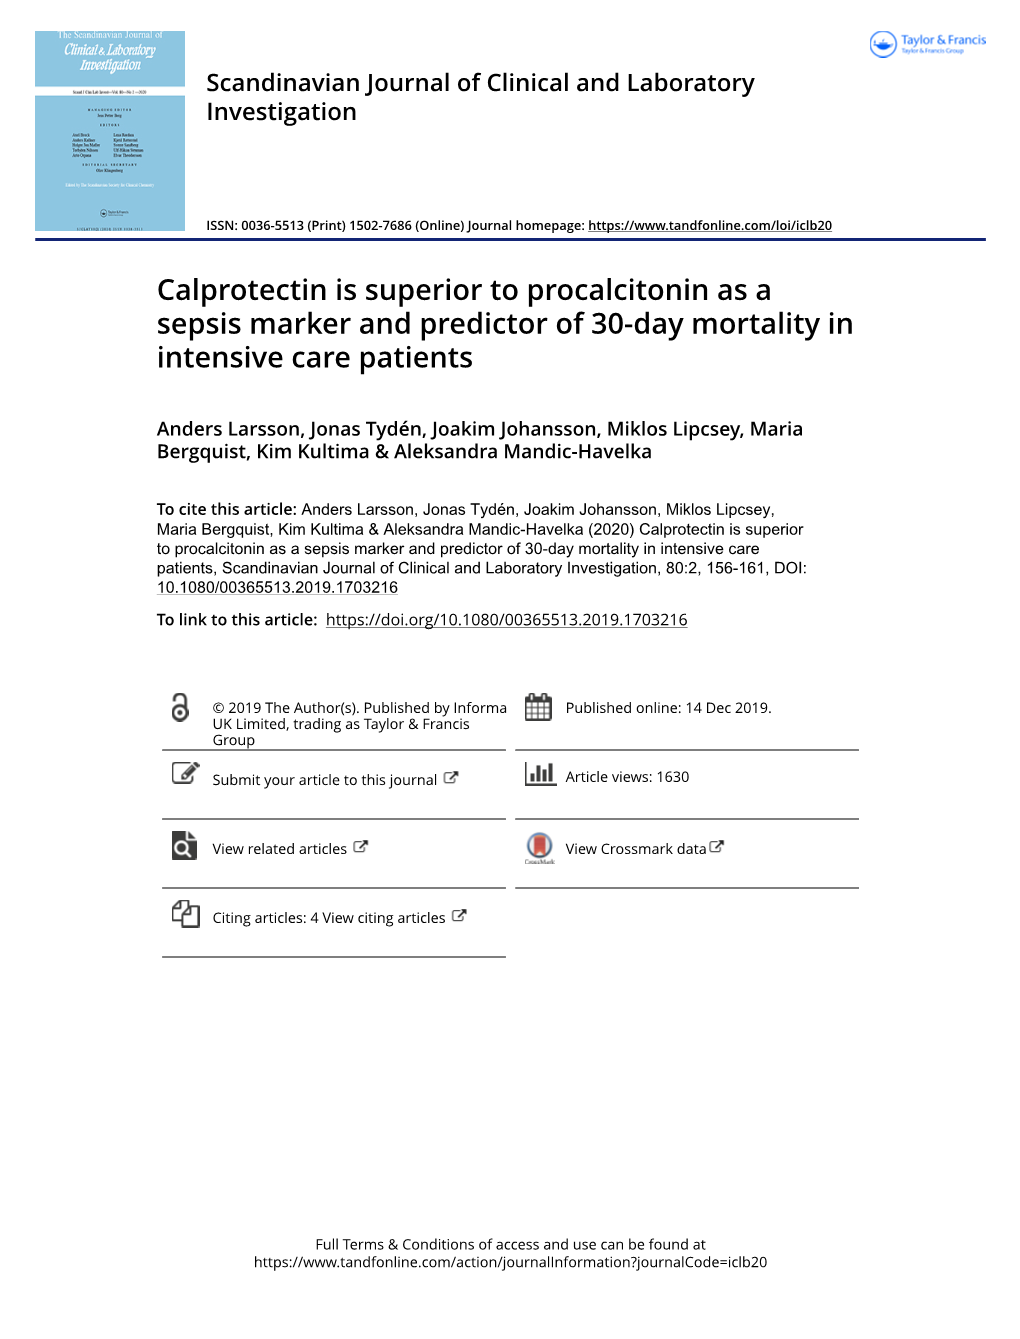 Calprotectin Is Superior to Procalcitonin As a Sepsis Marker and Predictor of 30-Day Mortality in Intensive Care Patients